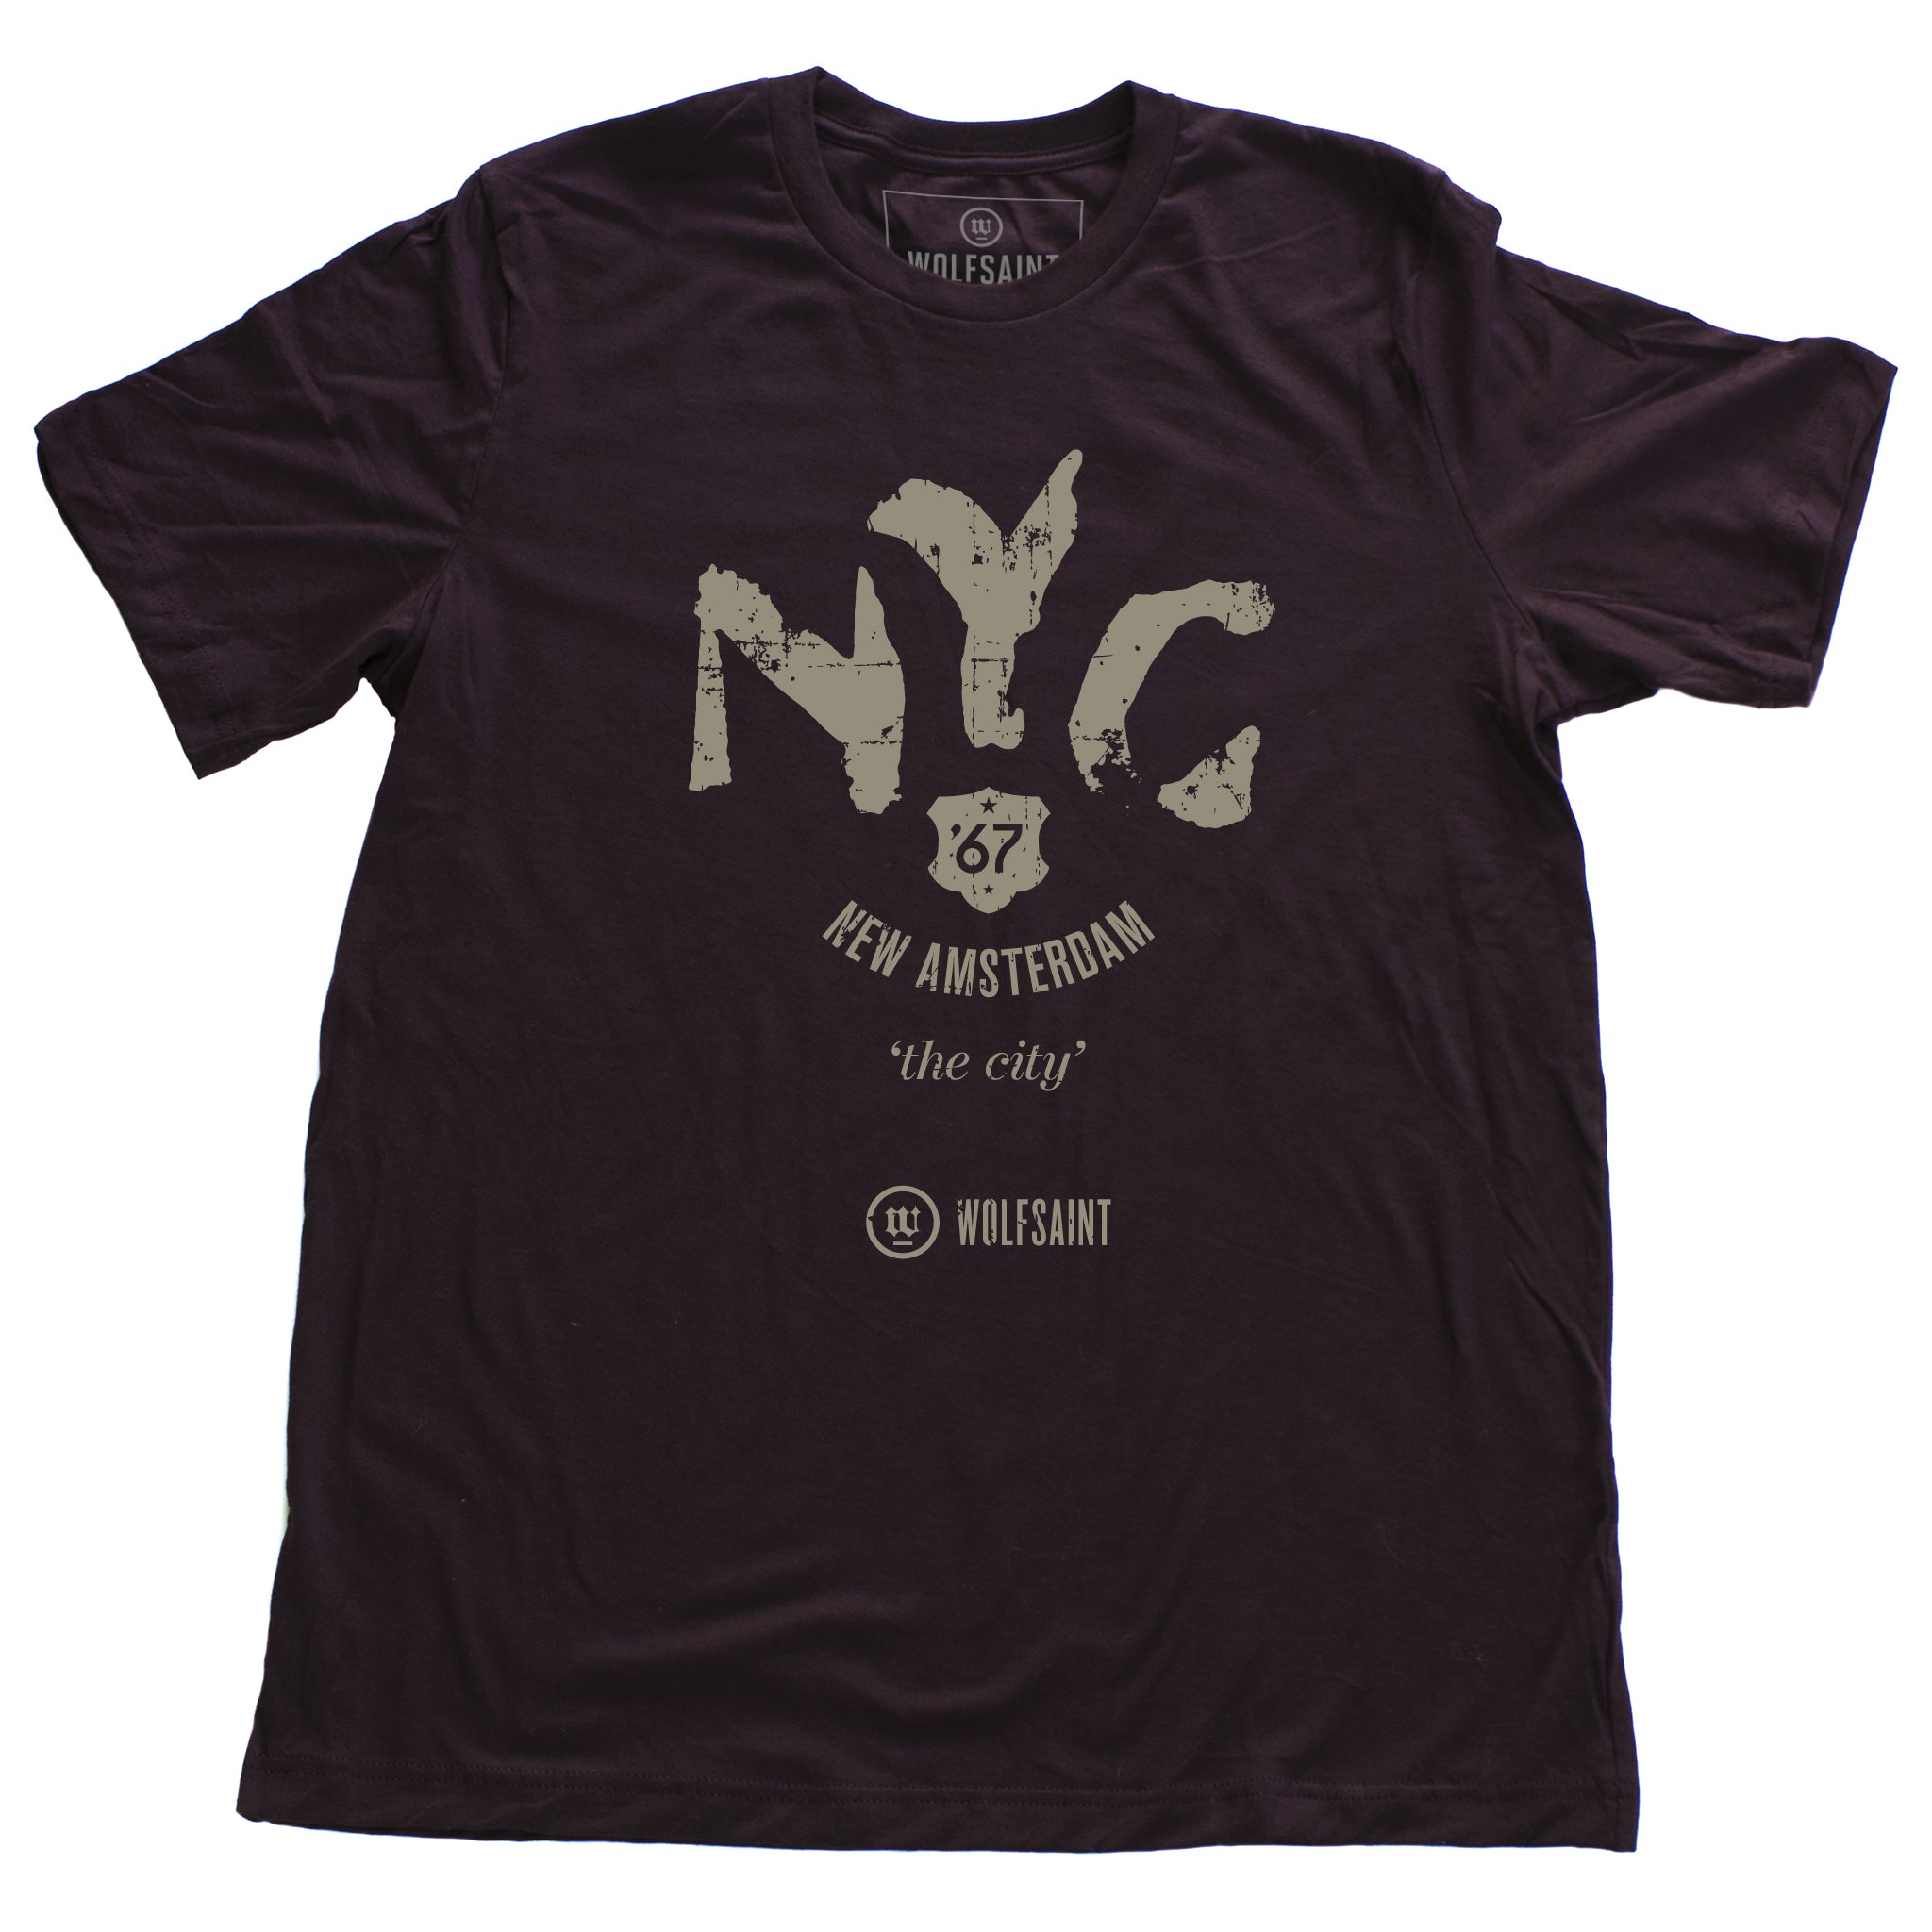 A classic vintage-inspired retro t-shirt in Oxblood/burgundy, featuring “NYC” in a large ‘painted’ font, with “New Amsterdam” in a small arc below, then “the city” and then the 